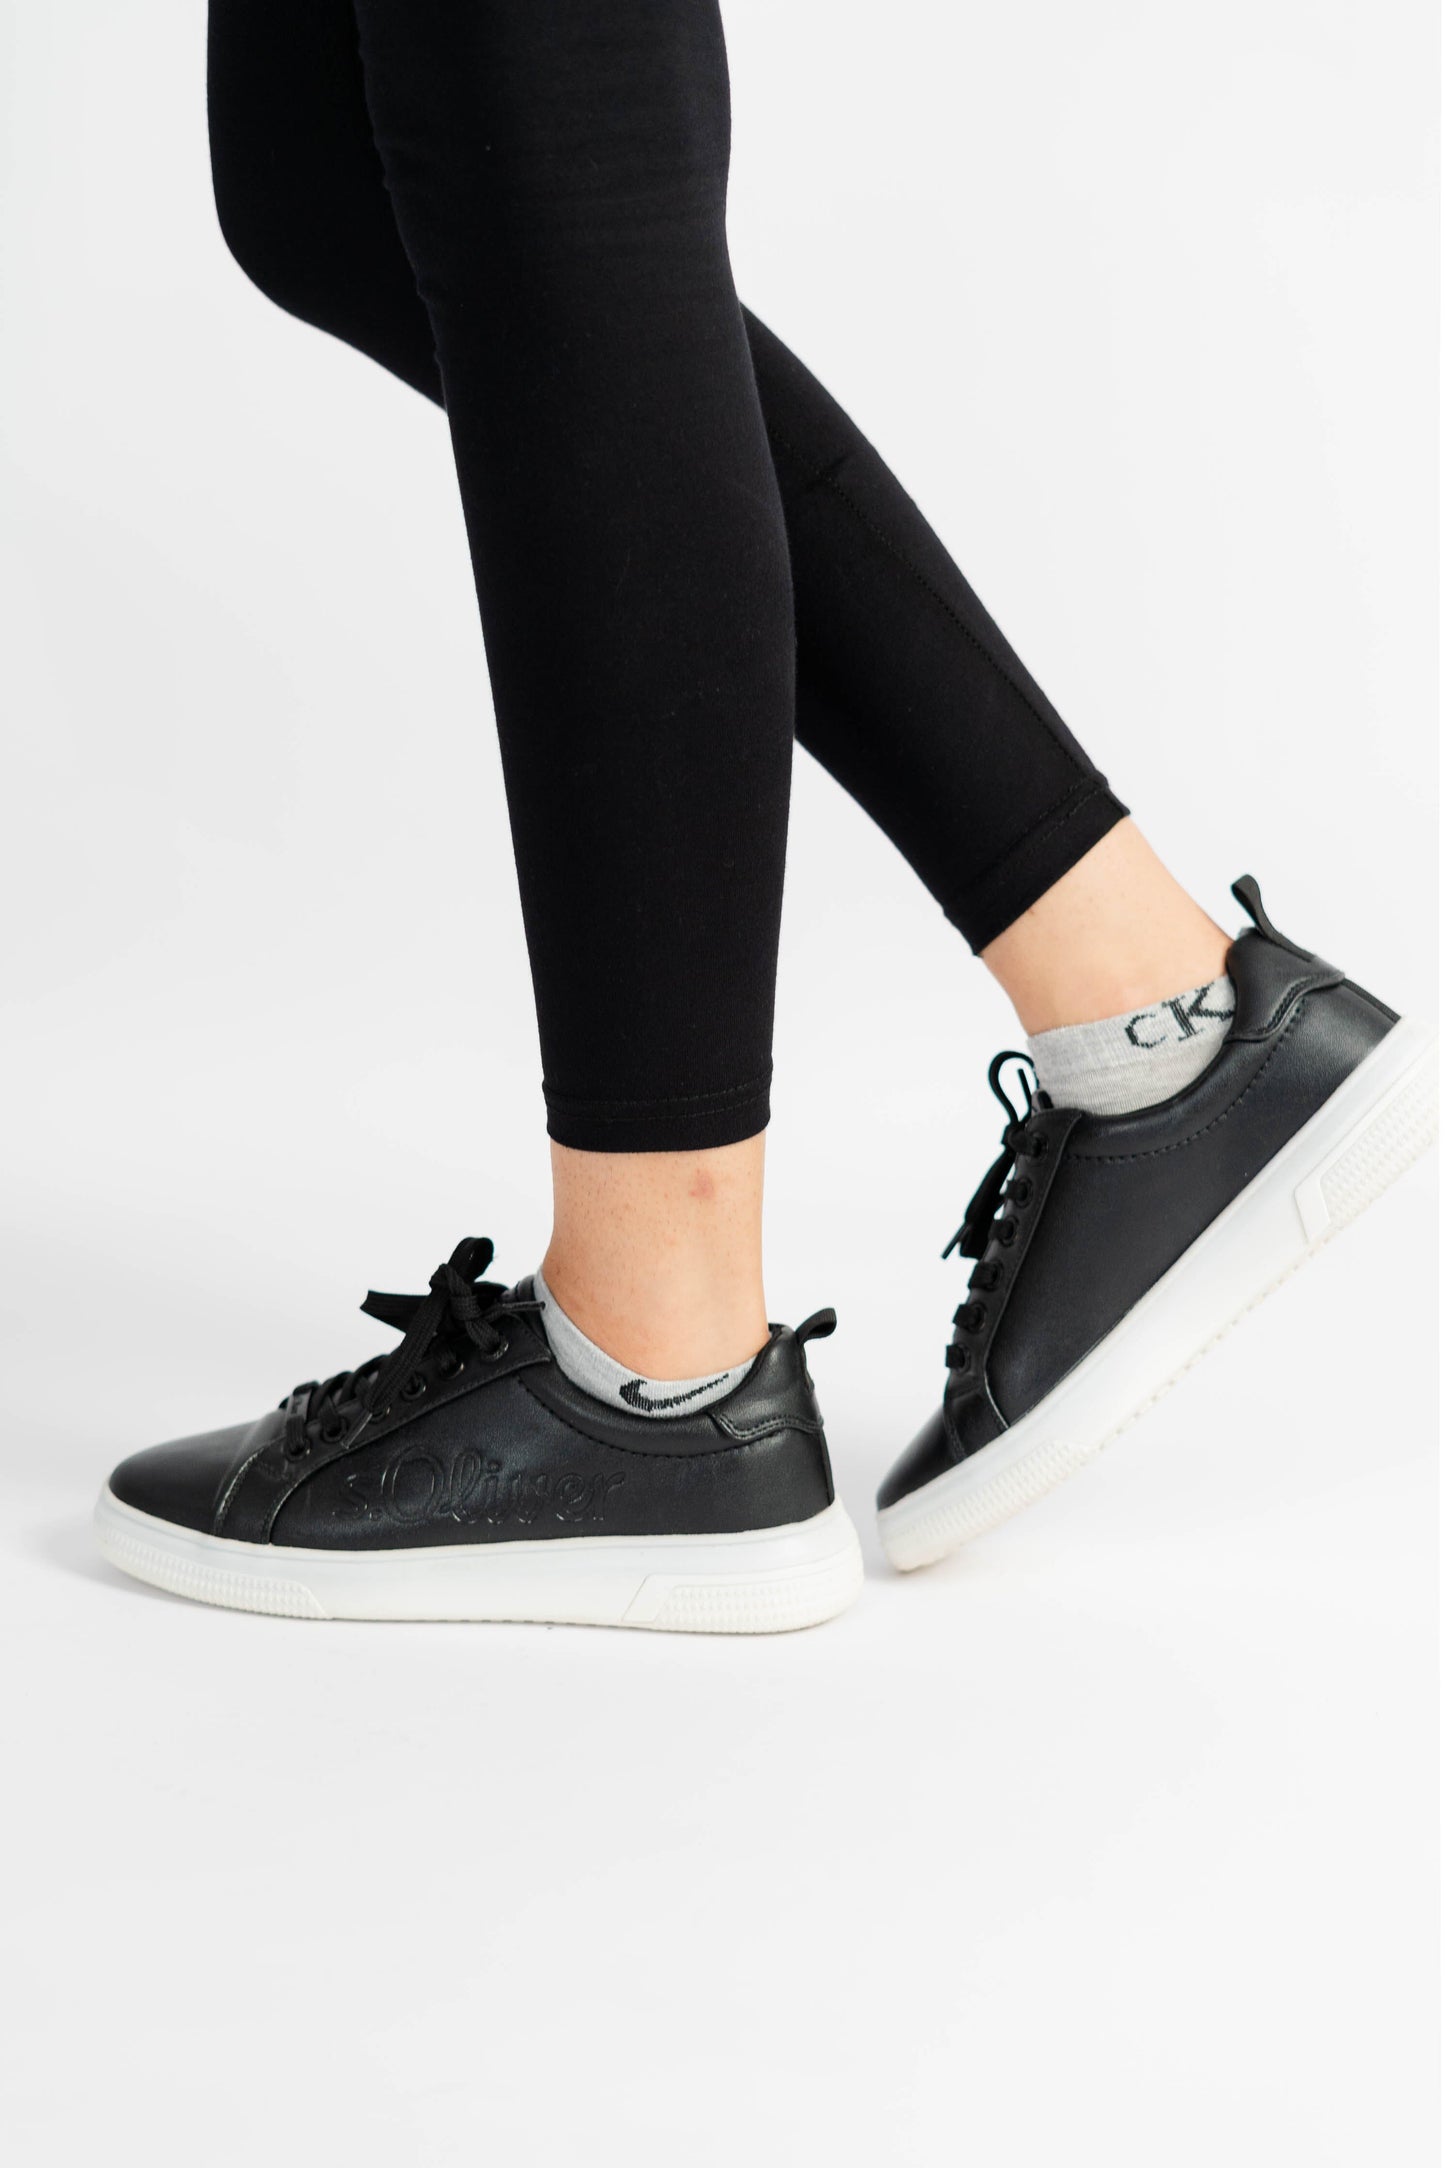 S.Oliver Unisex Harcourt Soft Sole Leather Sneakers